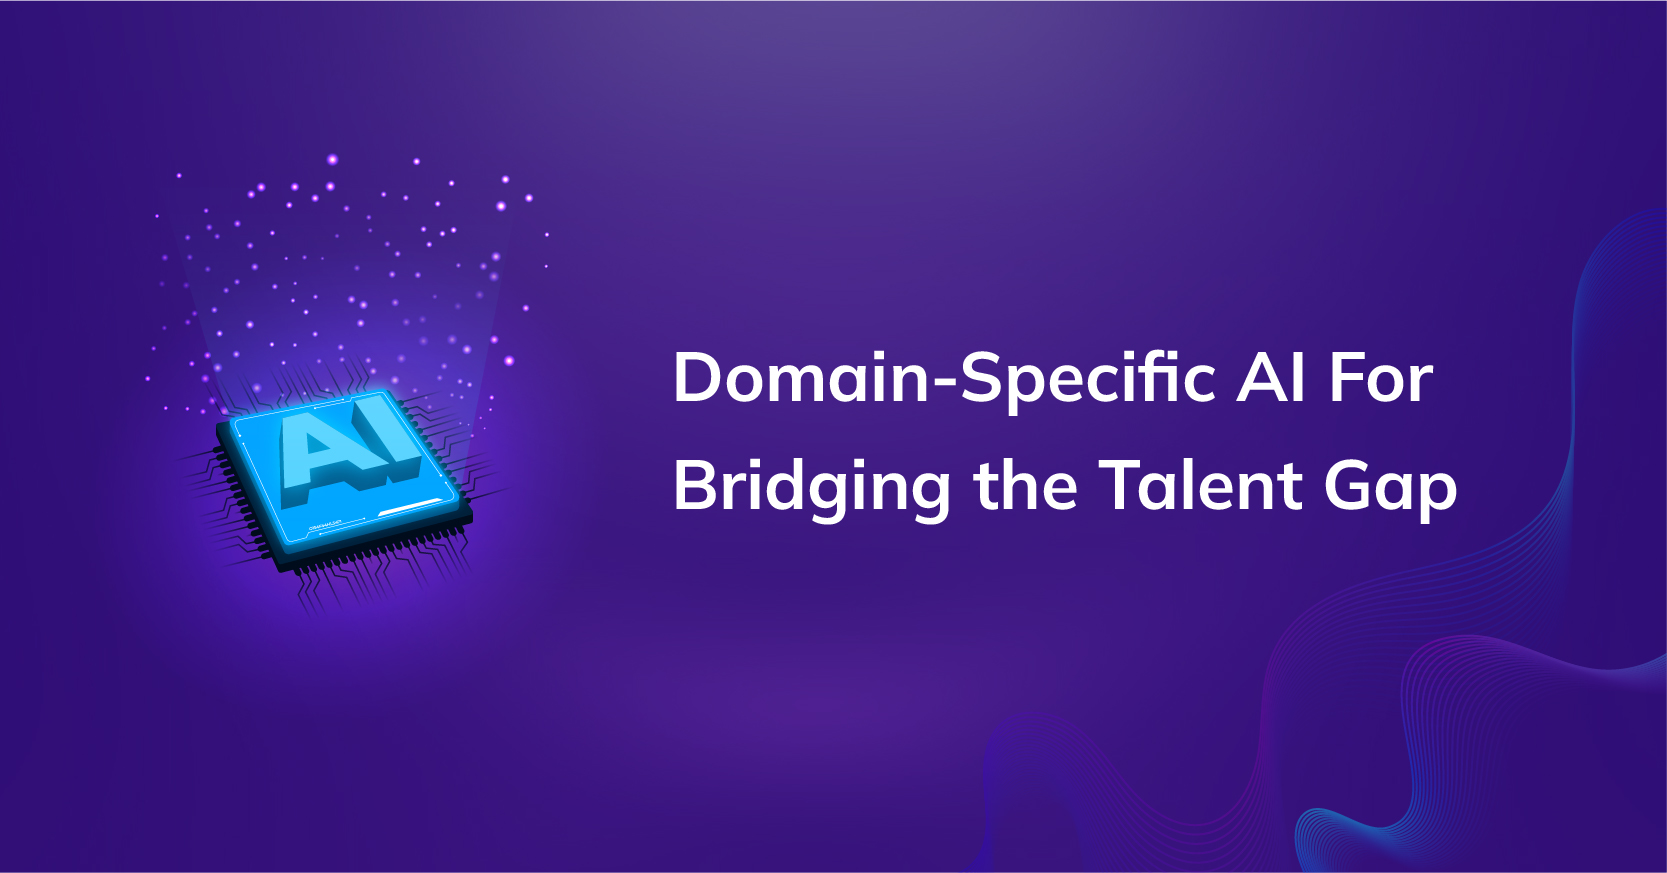 Why Domain-Specific AI is Key to Bridging the Talent Gap